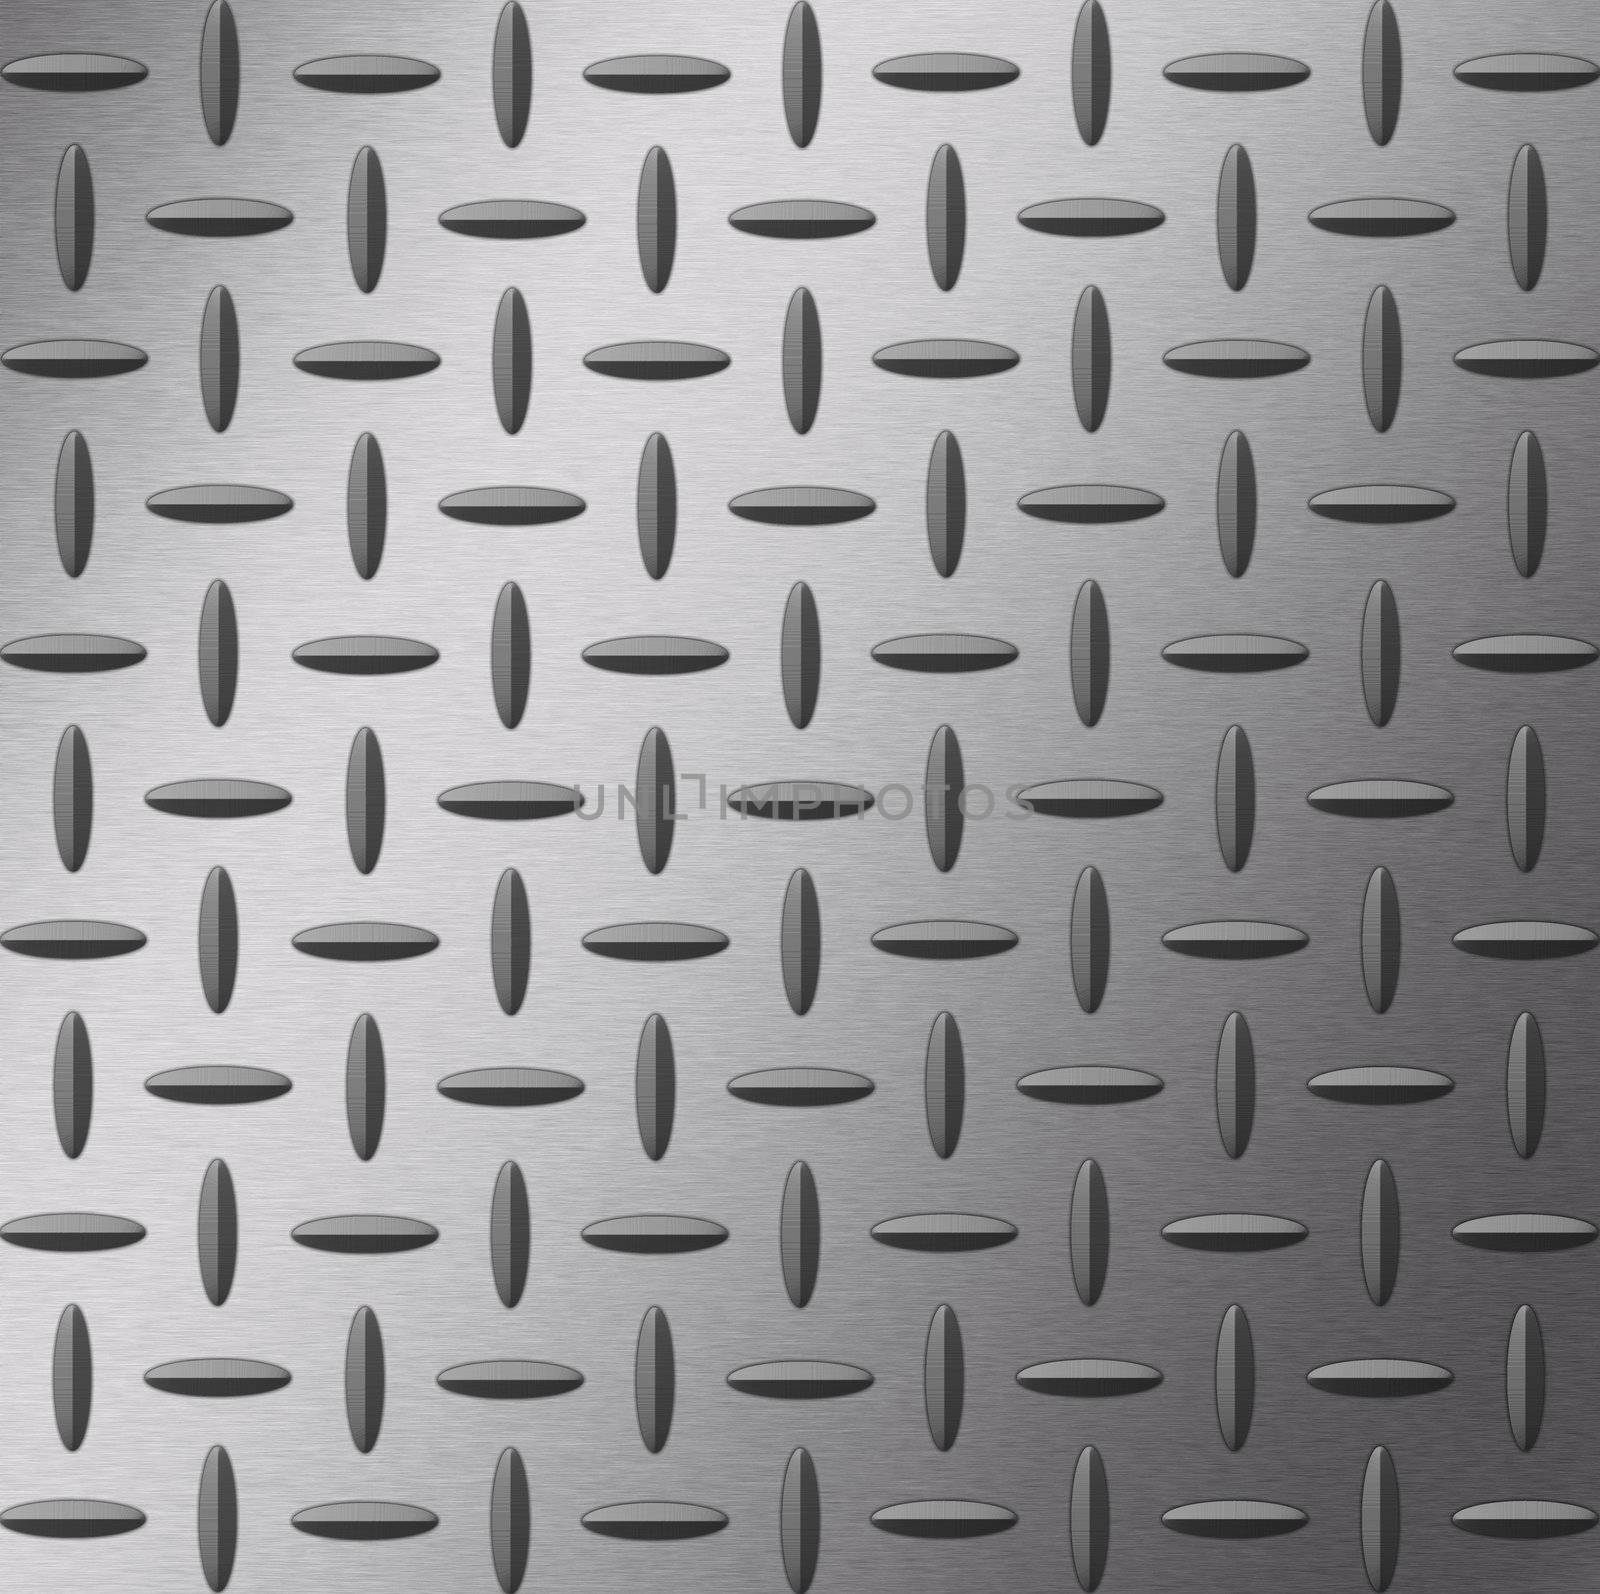 Image of a diamond plate texture.